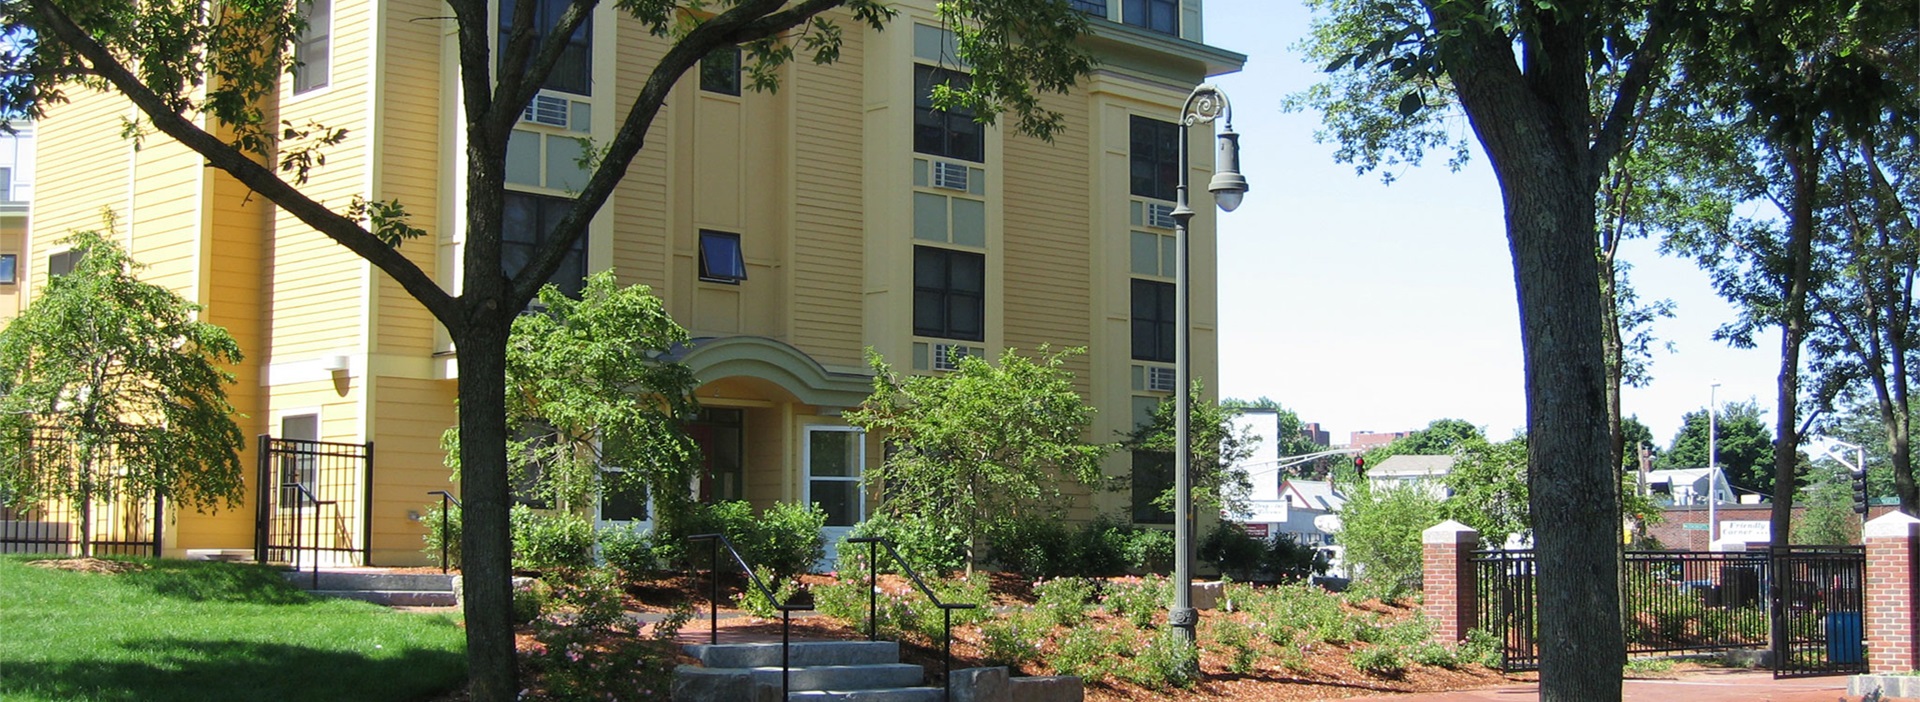 Photo of the Trolley Square Apartments